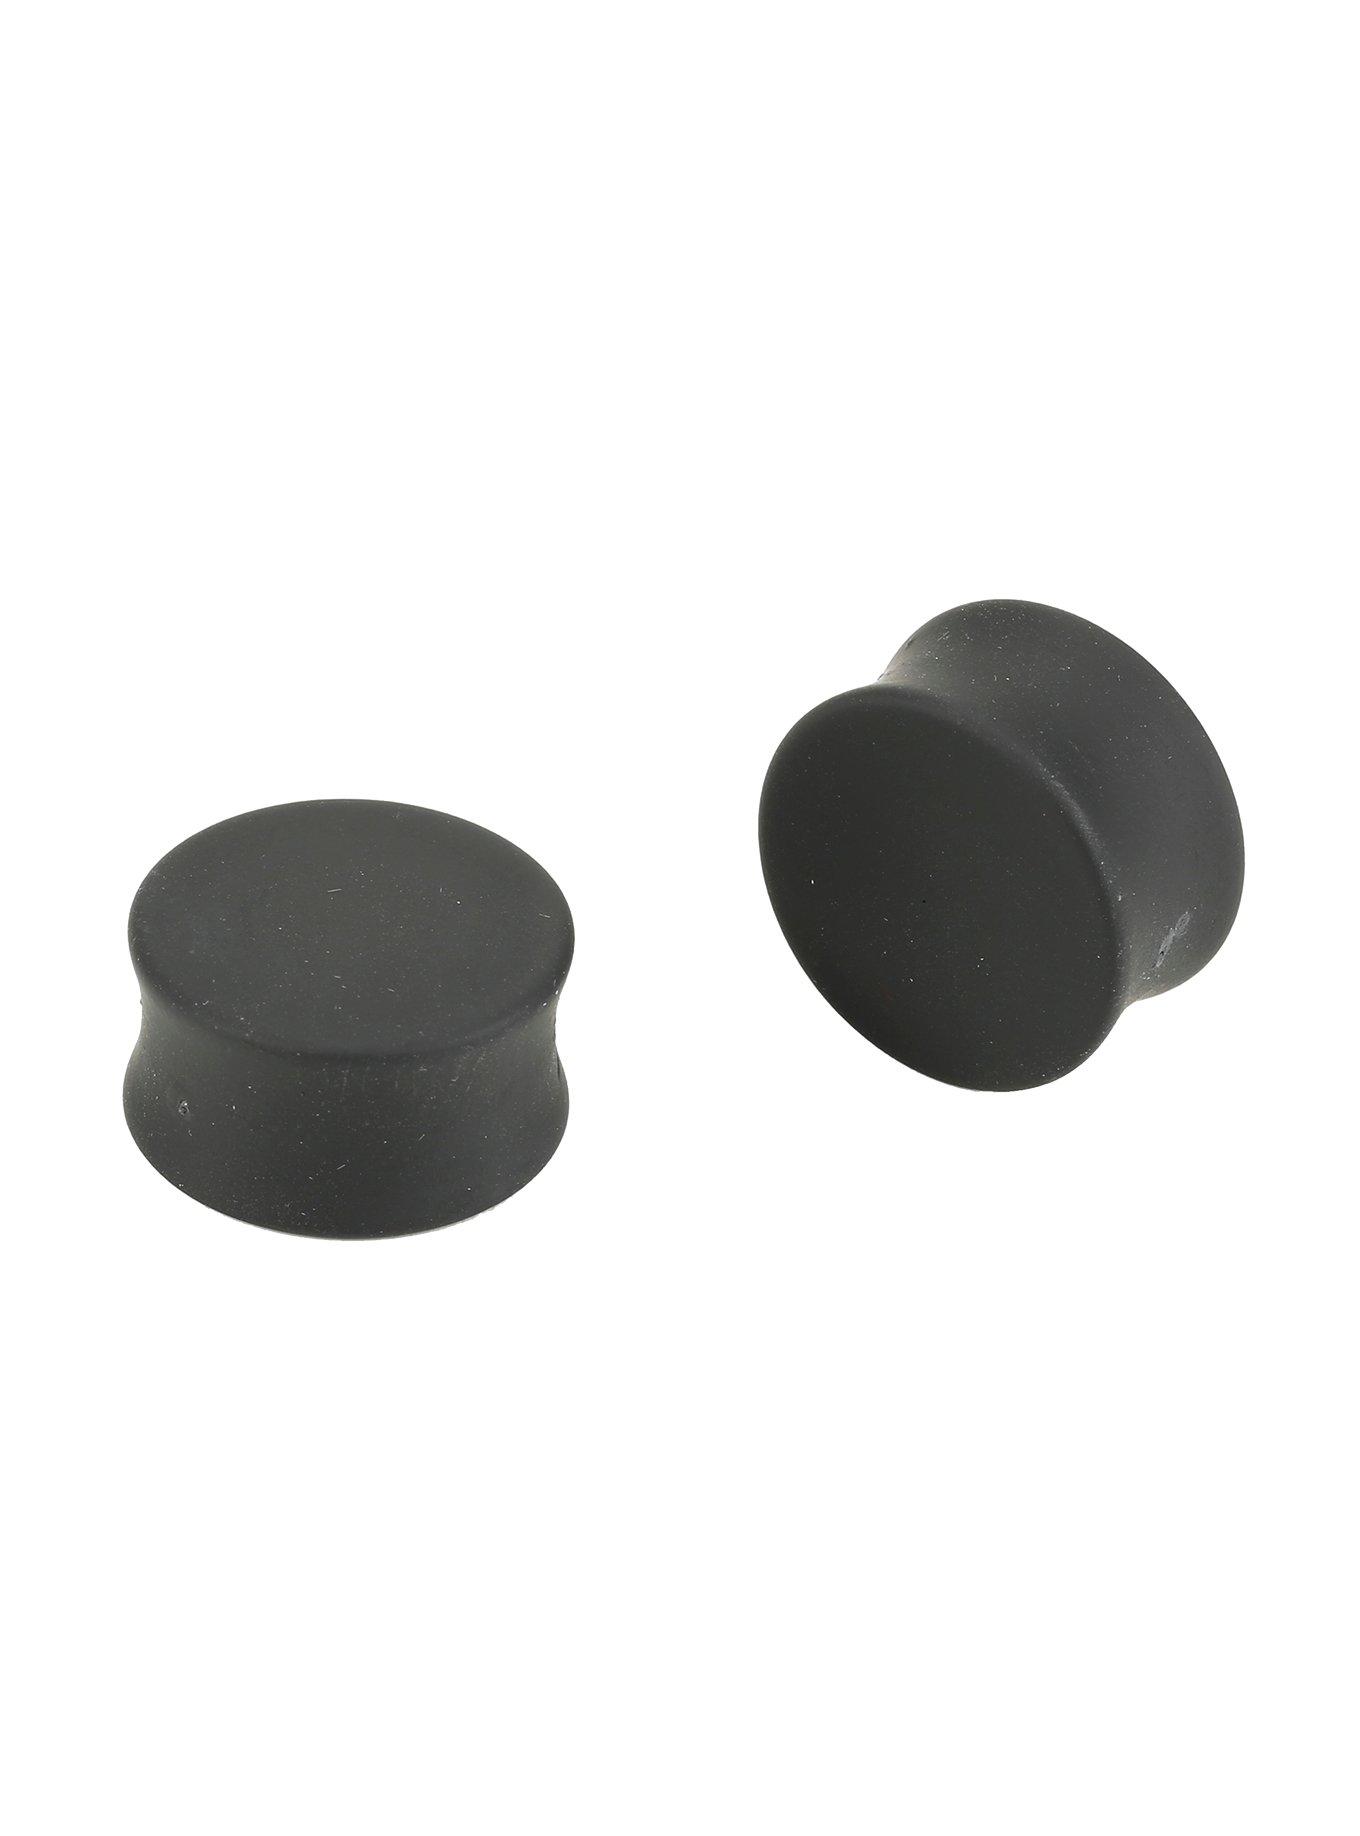 Acrylic Black Matte Smooth Touch Plug 2 Pack, BLACK, hi-res